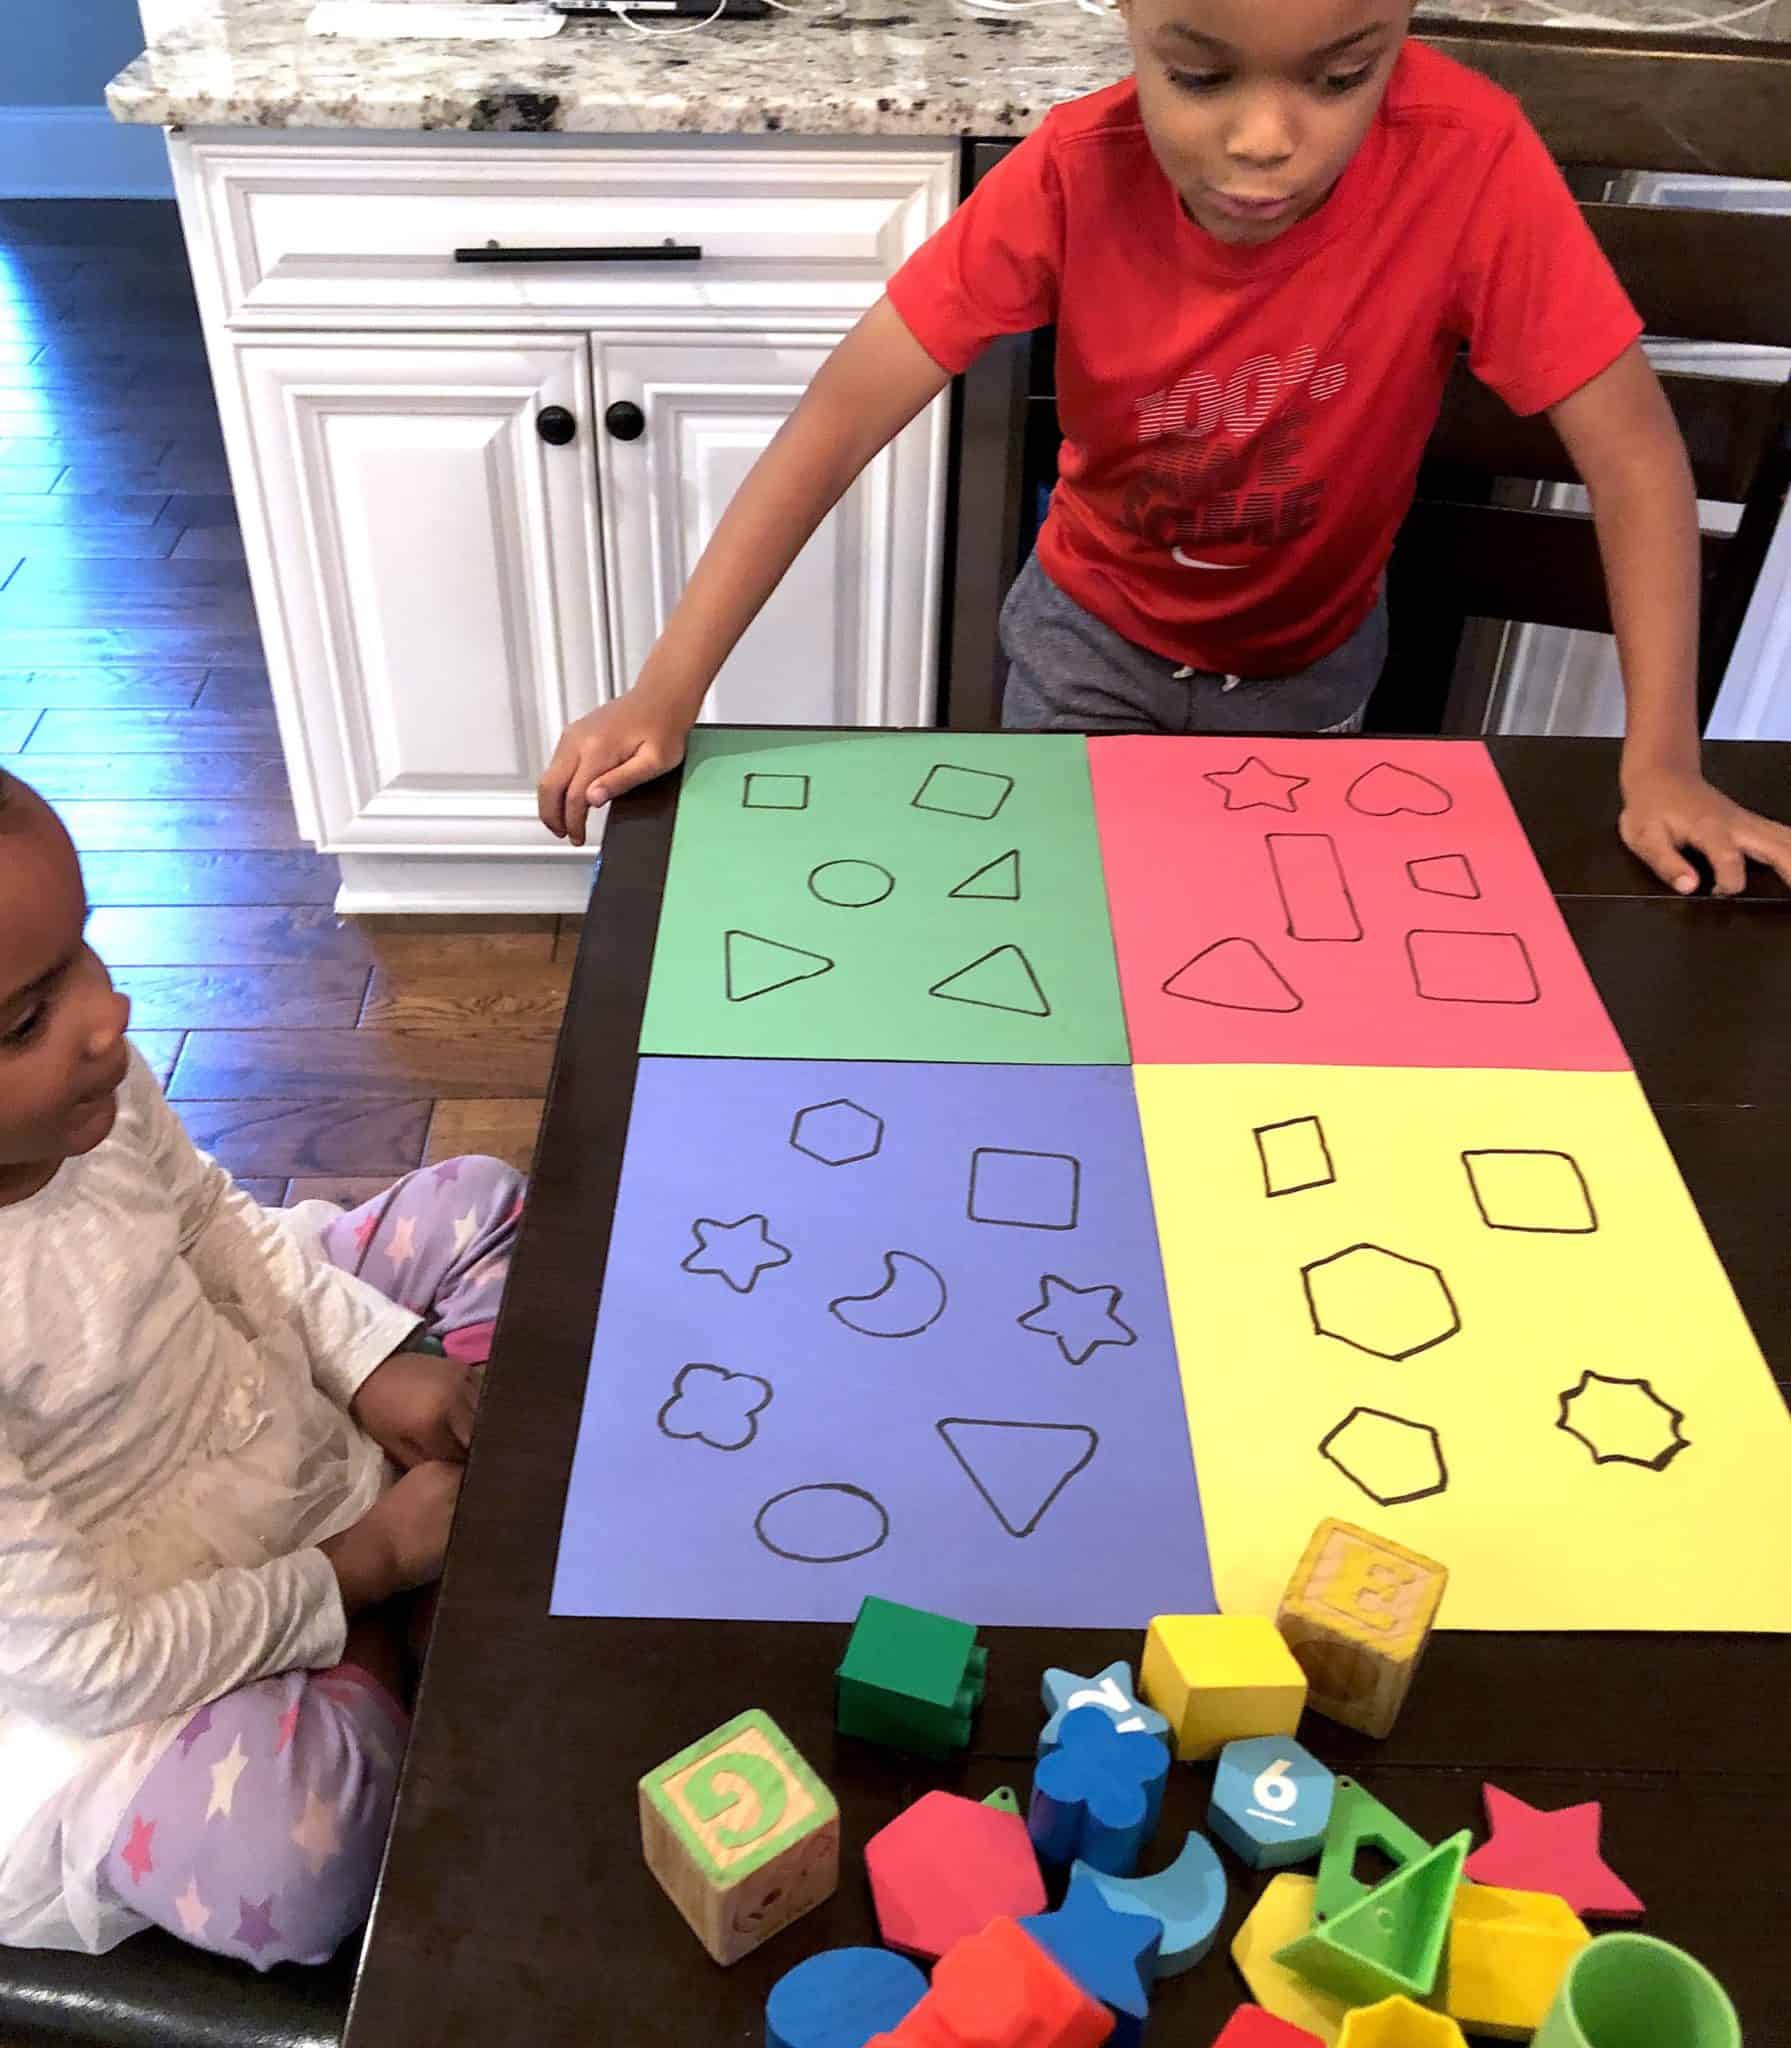 Toddler Learning Activities that involve shapes are an absolute must. Easy toddler activities that include colors are awesome as well. This sorting activity combines the two!